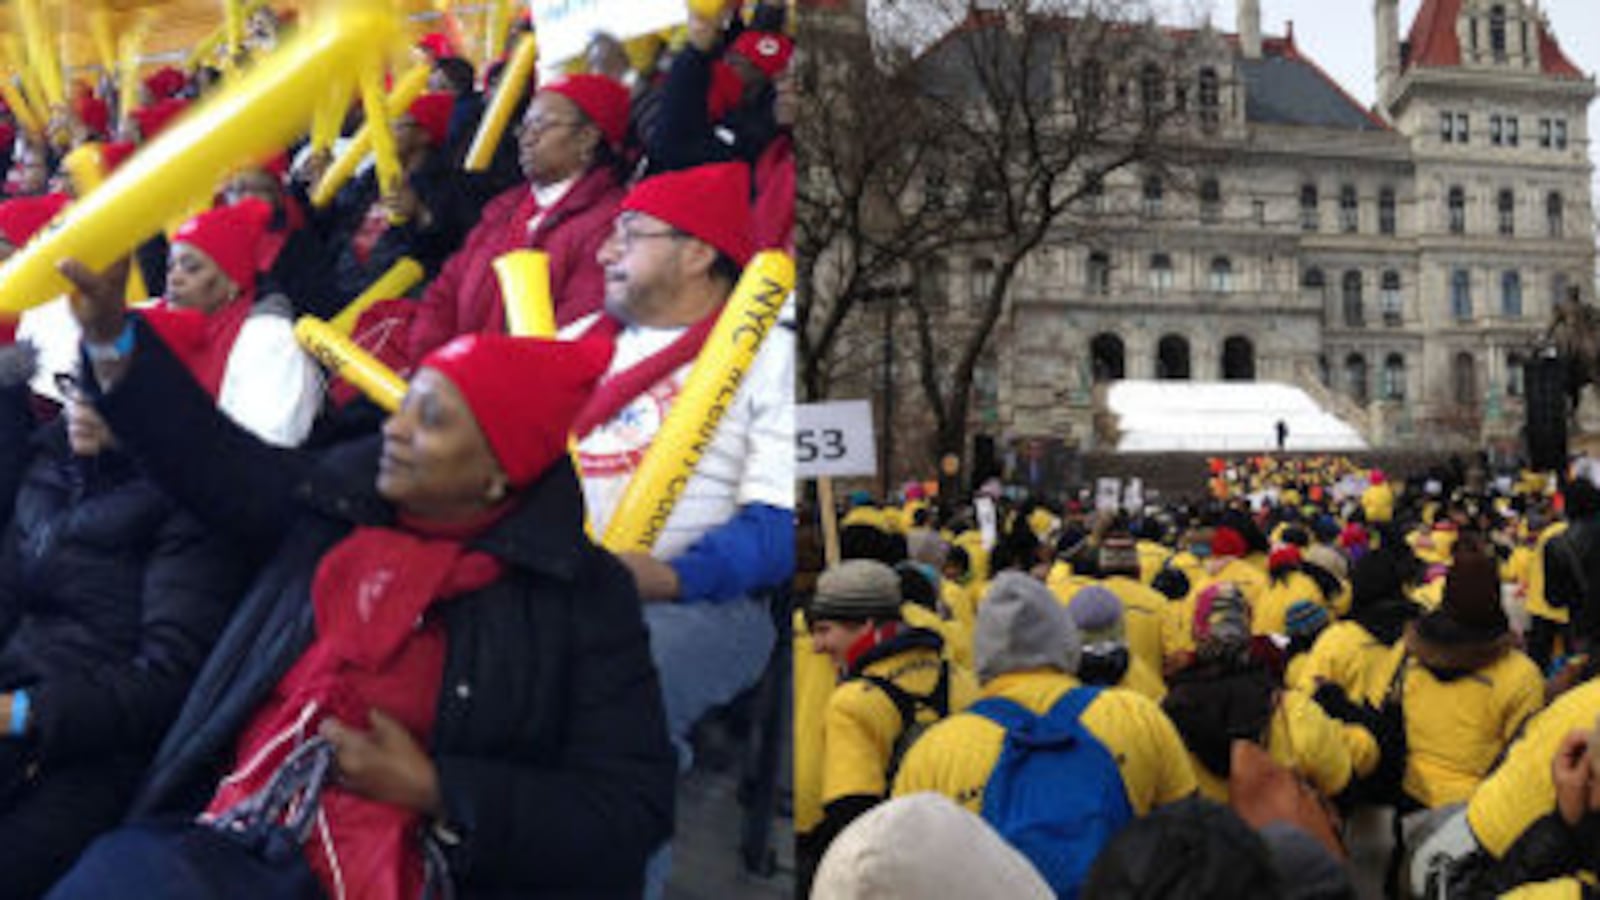 Crowds at dueling education rallies earlier this year in Albany, two of the many expenses that lobbying groups had in an unusually busy legislative session.